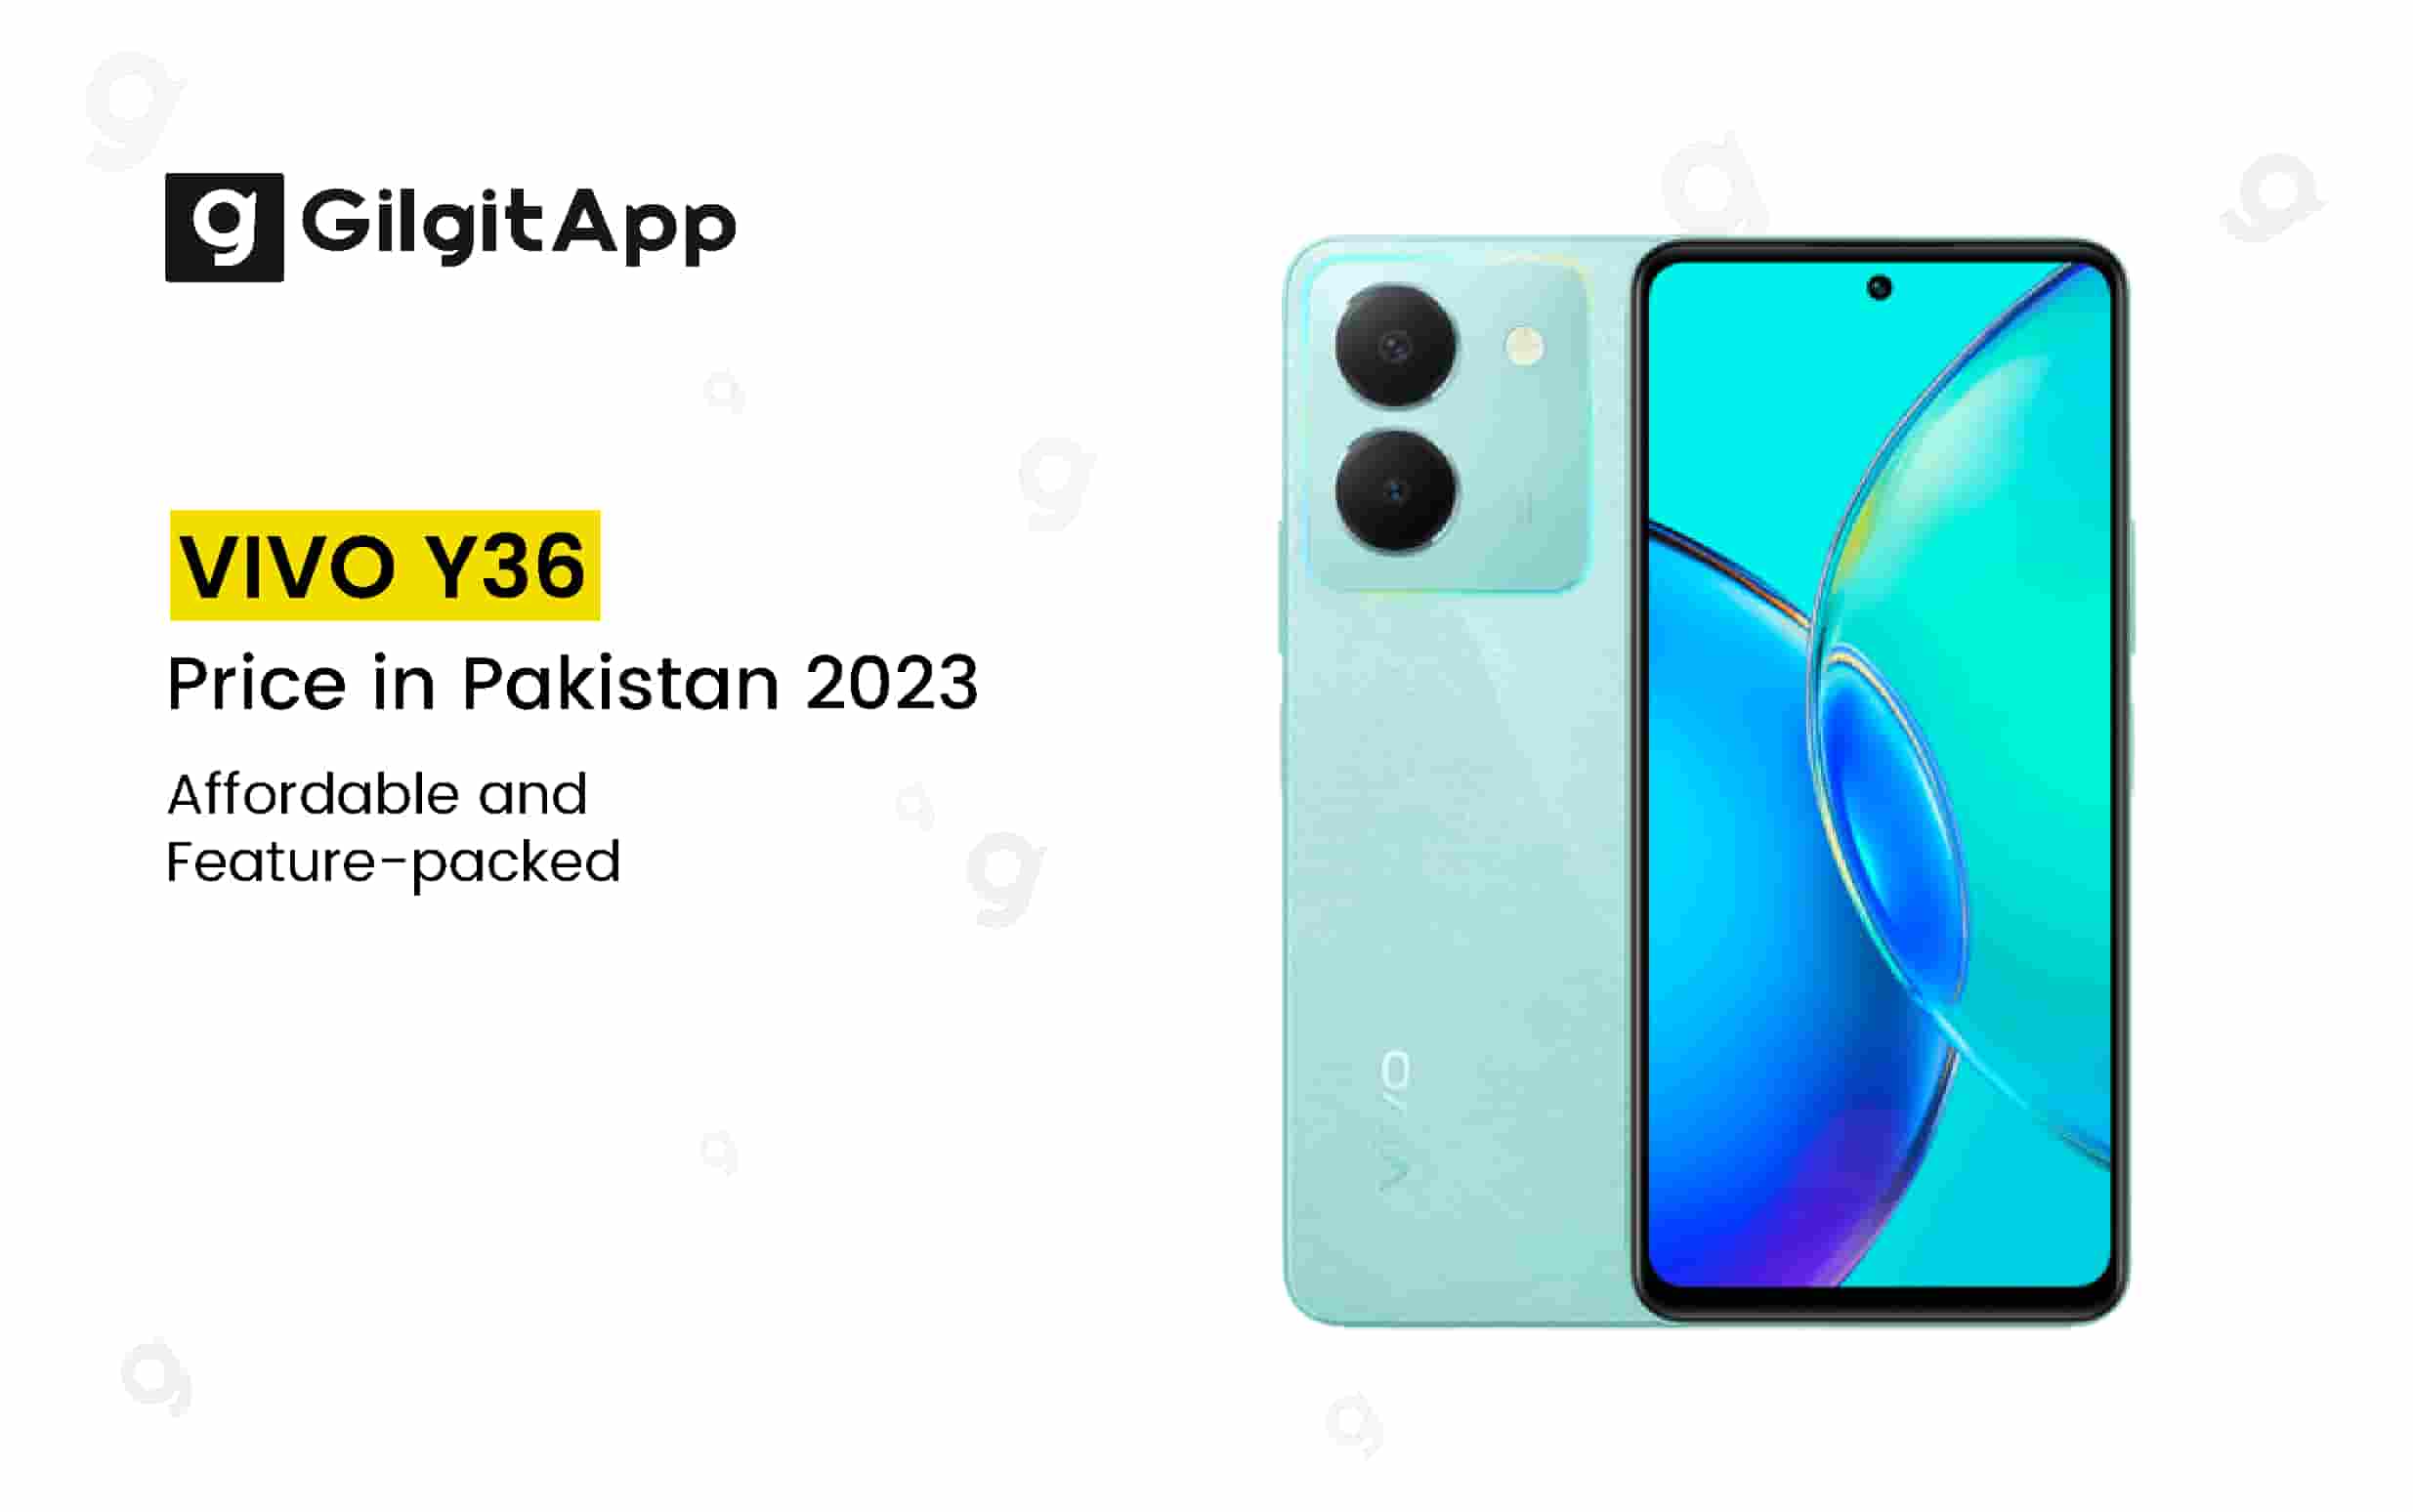 VIVO Y36 Price in Pakistan 2023 Affordable and Featurepacked